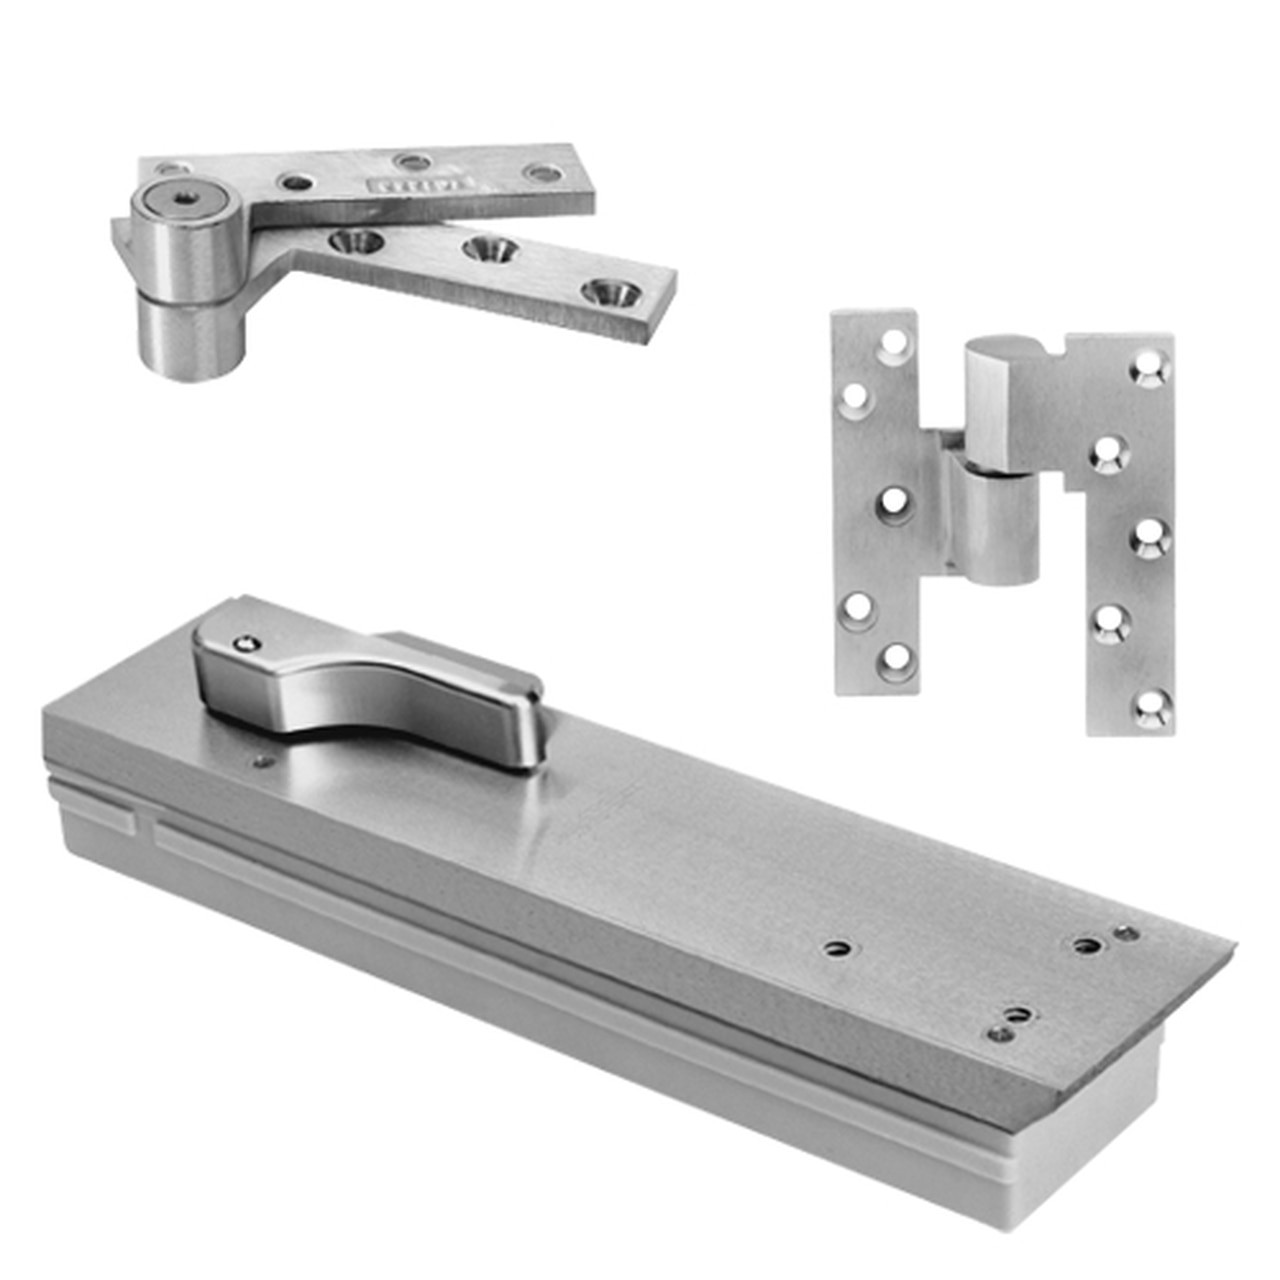 FQ5105NBC-SC-RH-626 Rixson Q51 Series Fire Rated 3/4" Offset Hung Shallow Depth Floor Closers in Satin Chrome Finish